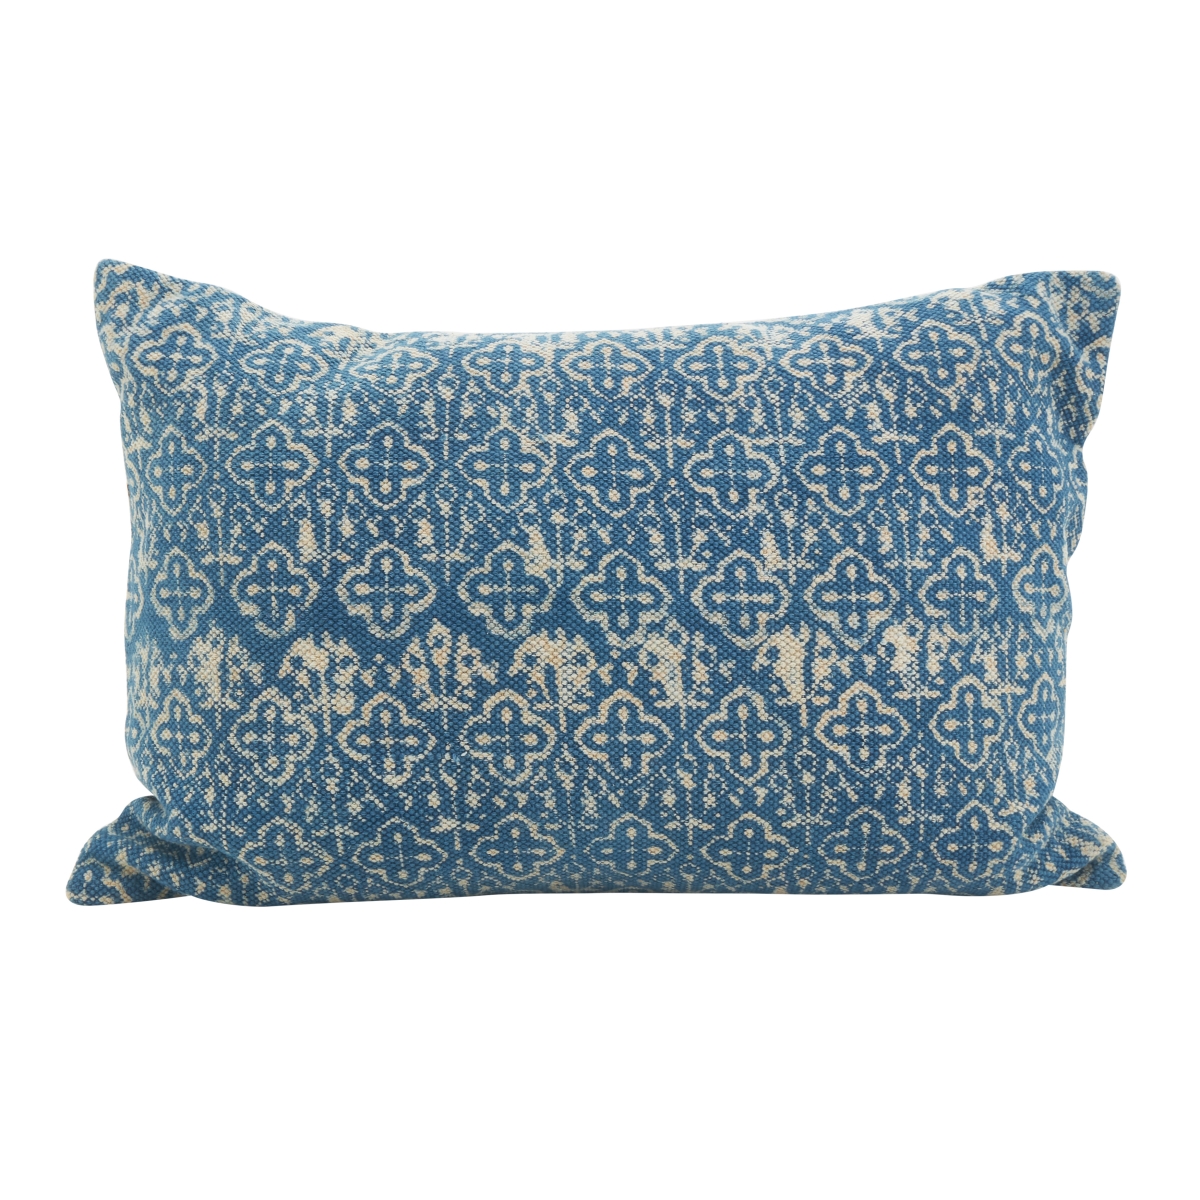 8410.in1624b 16 X 24 In. Rectangle Petite Distressed Boho Down Filled Throw Pillow - Indigo